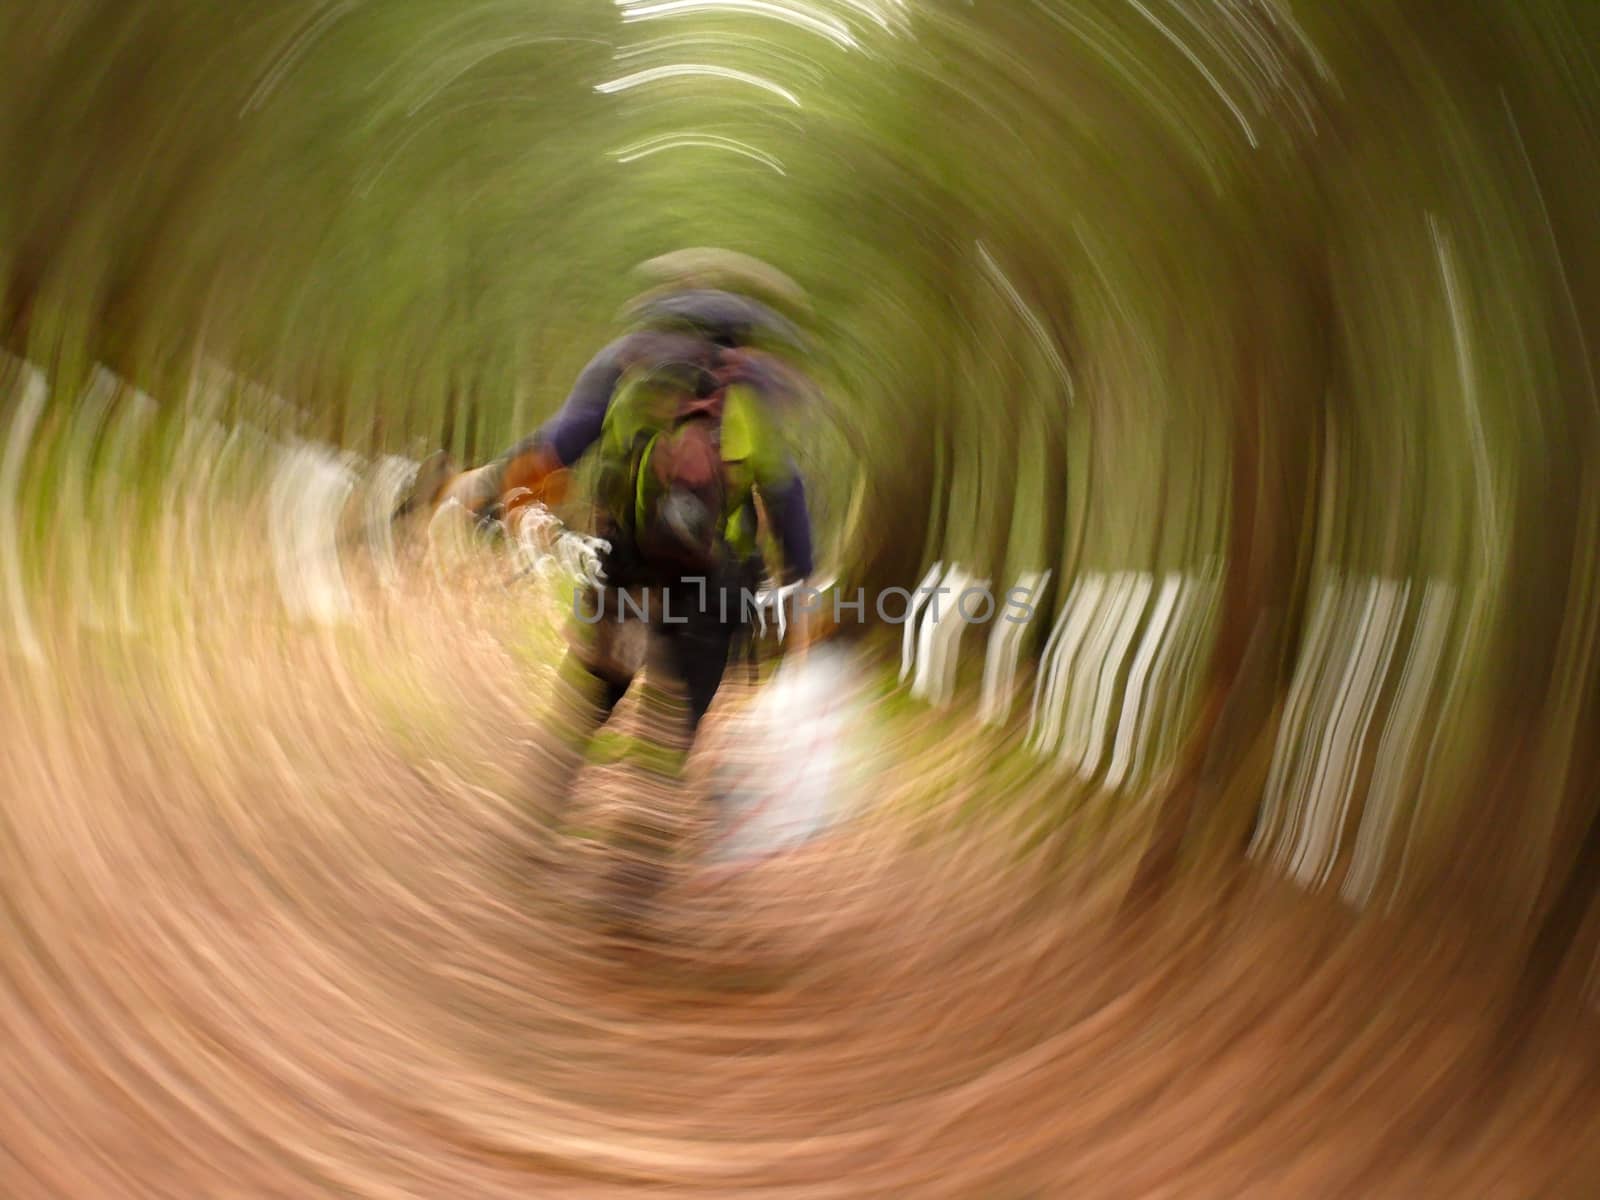 abstract Photo out of focus roundabout. man with backpack in forest. Can be used as background